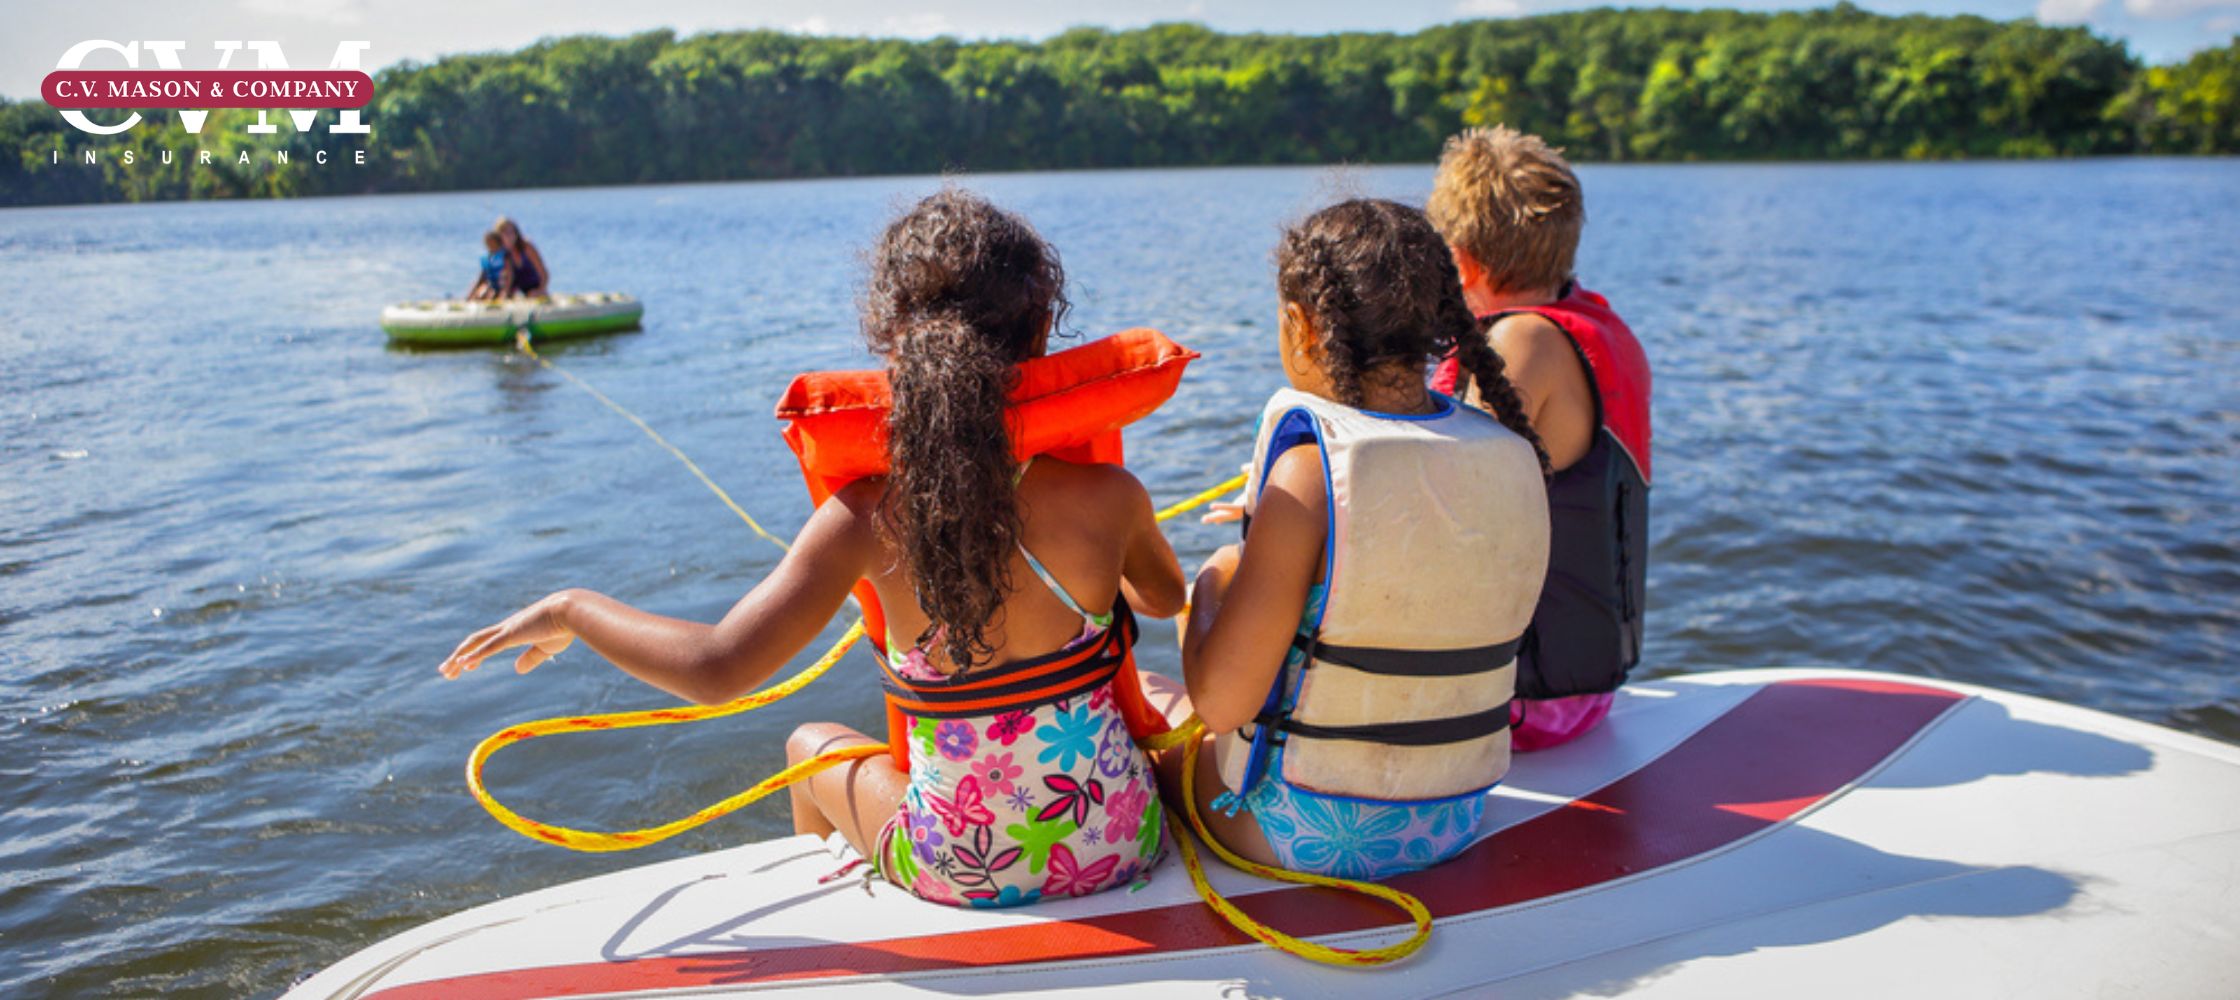 Boating safety tips